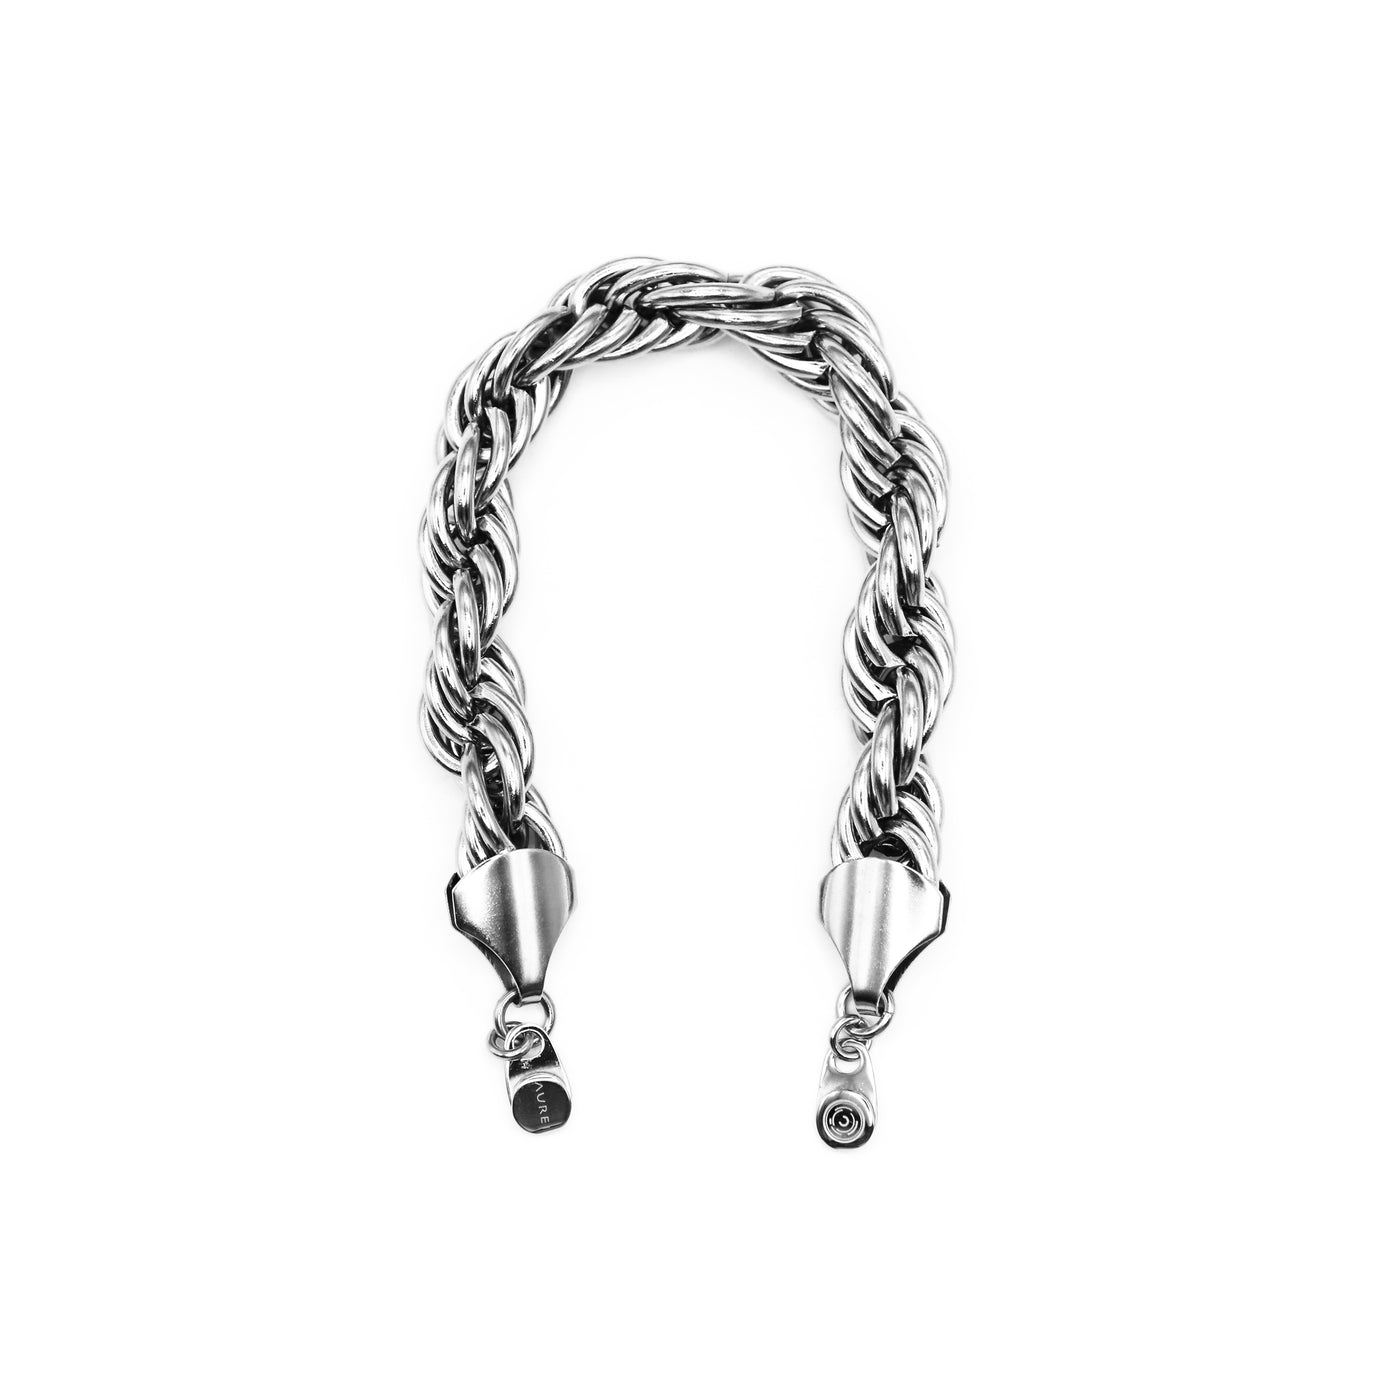 Thick Bracelet Rope Chain Adapter